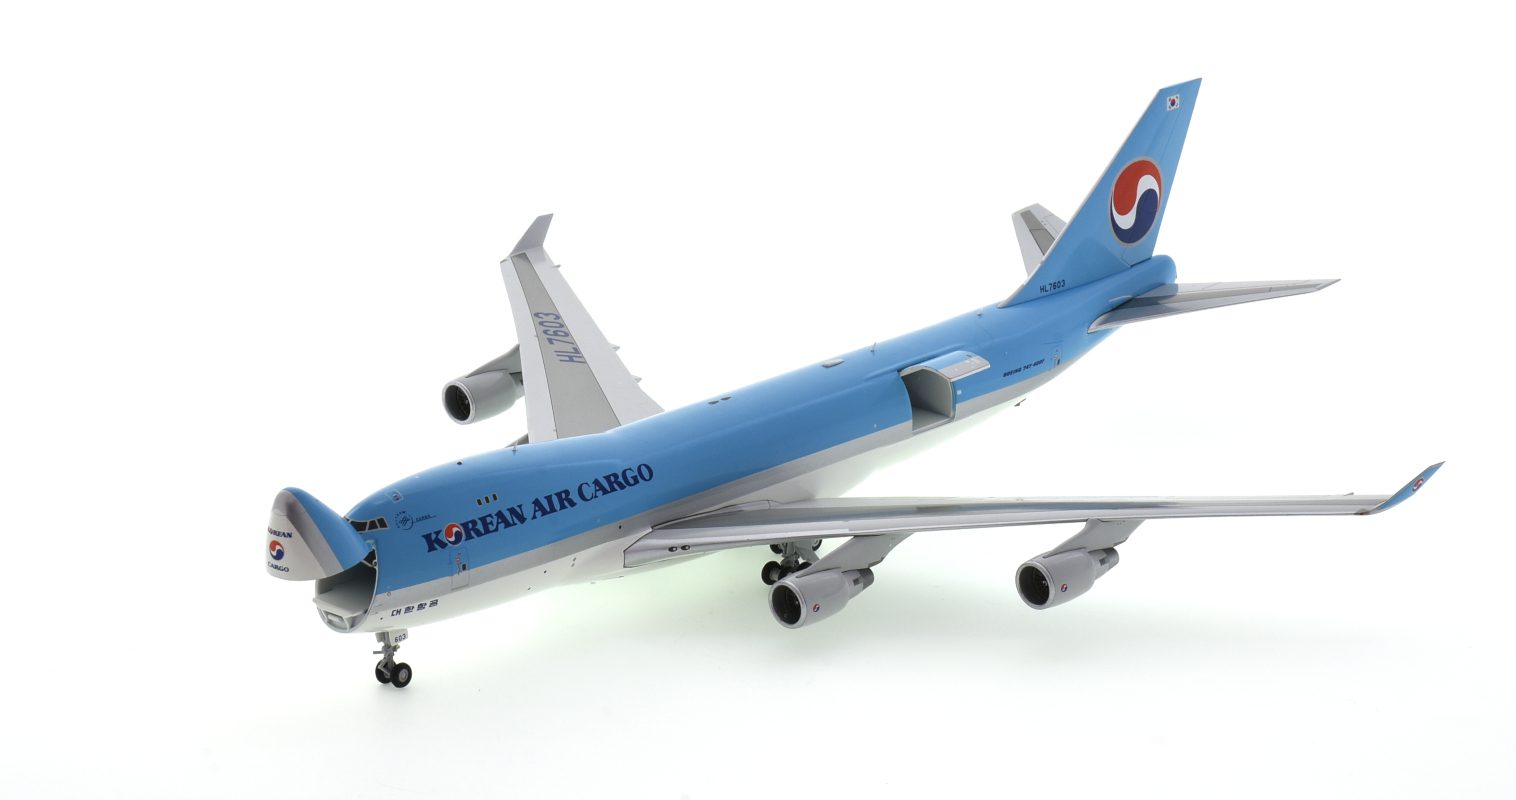 Front port side view of Gemini Jets G2KAL930 - Boeing 747-400ERF 1/200 scale diecast model, registration HL-7603 in Korean Air Cargo's livery.